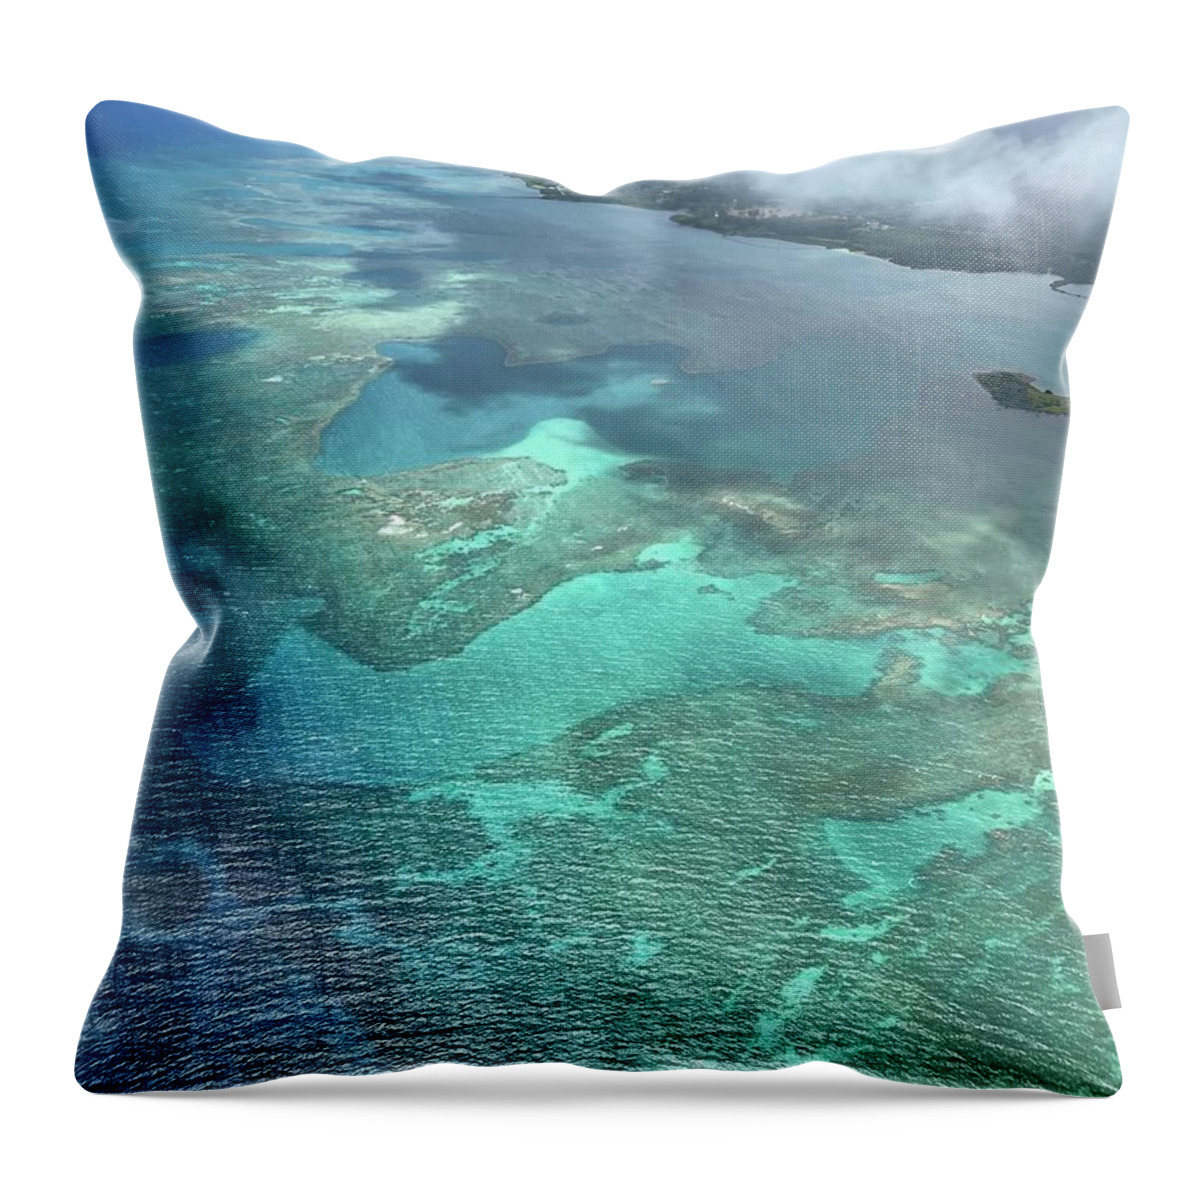 Photograph Throw Pillow featuring the photograph Molokai Island Reef by Beverly Read